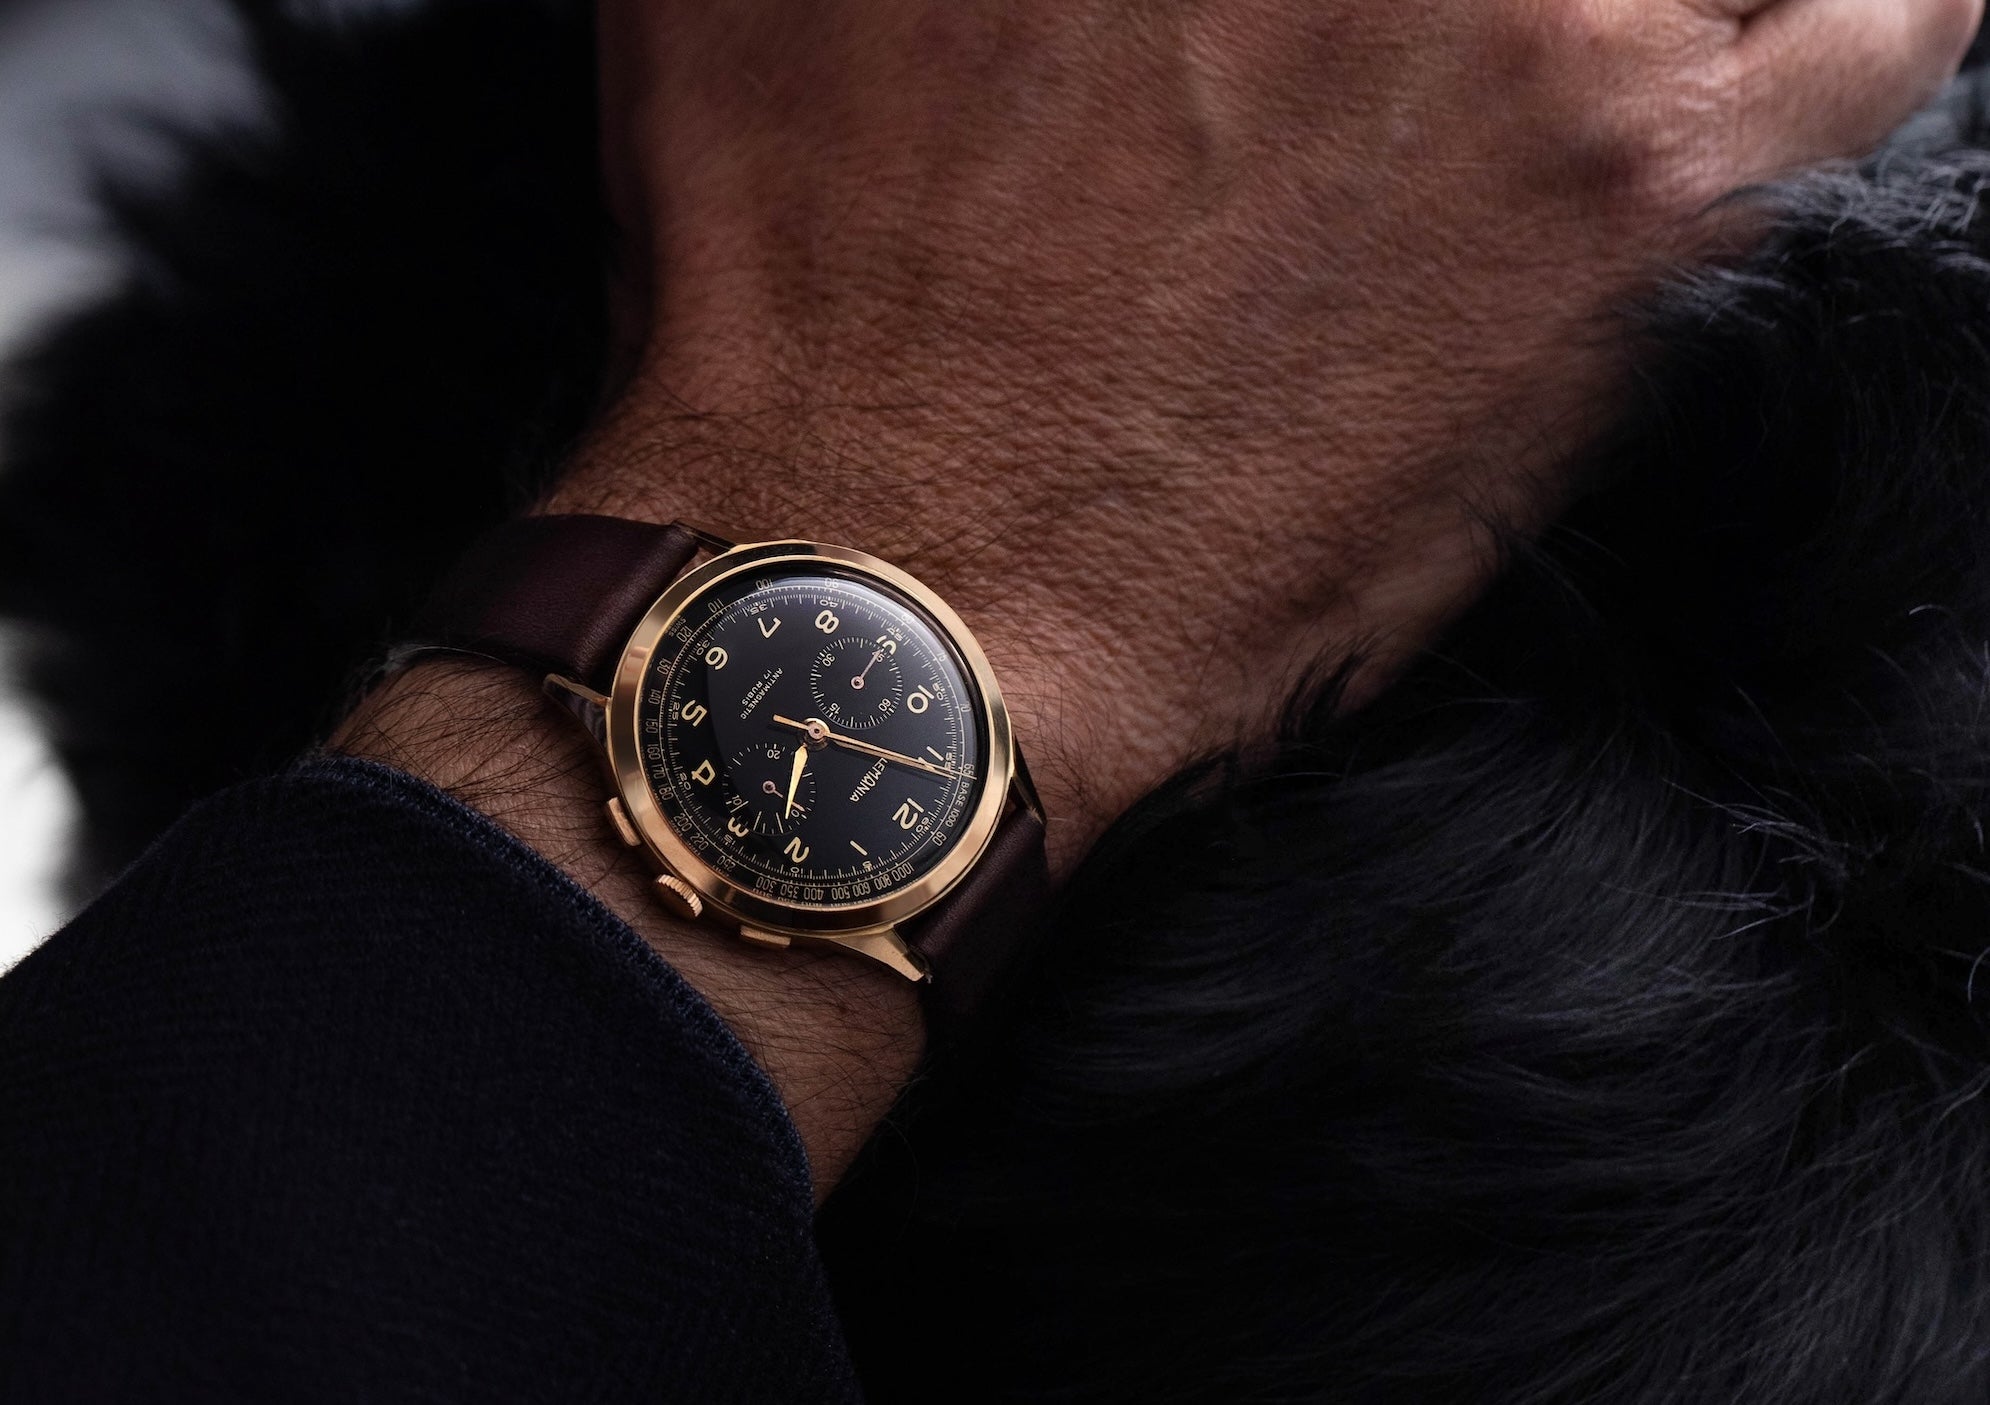 Lemania chronograph in yellow gold with black dial petting a dog